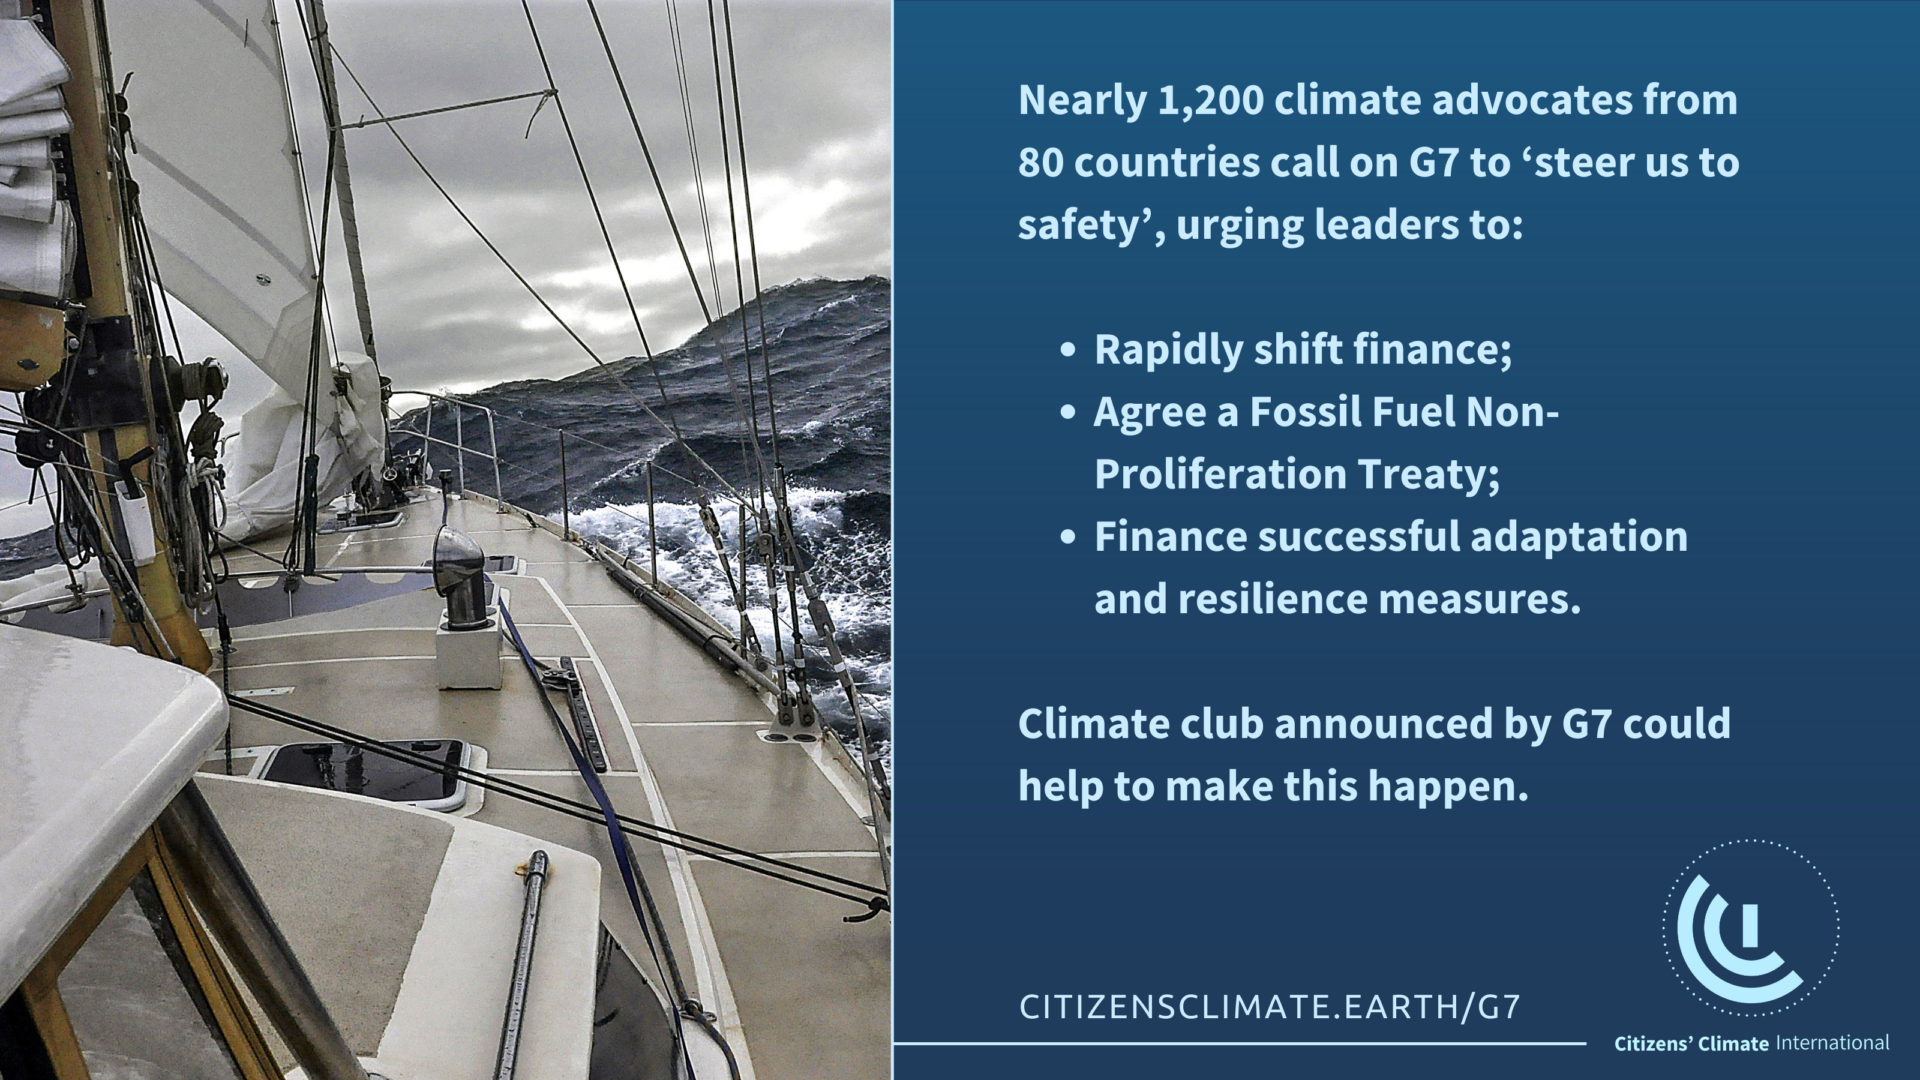 Media Release: Global Climate Advocacy Groups Applaud G7 Climate Clubs